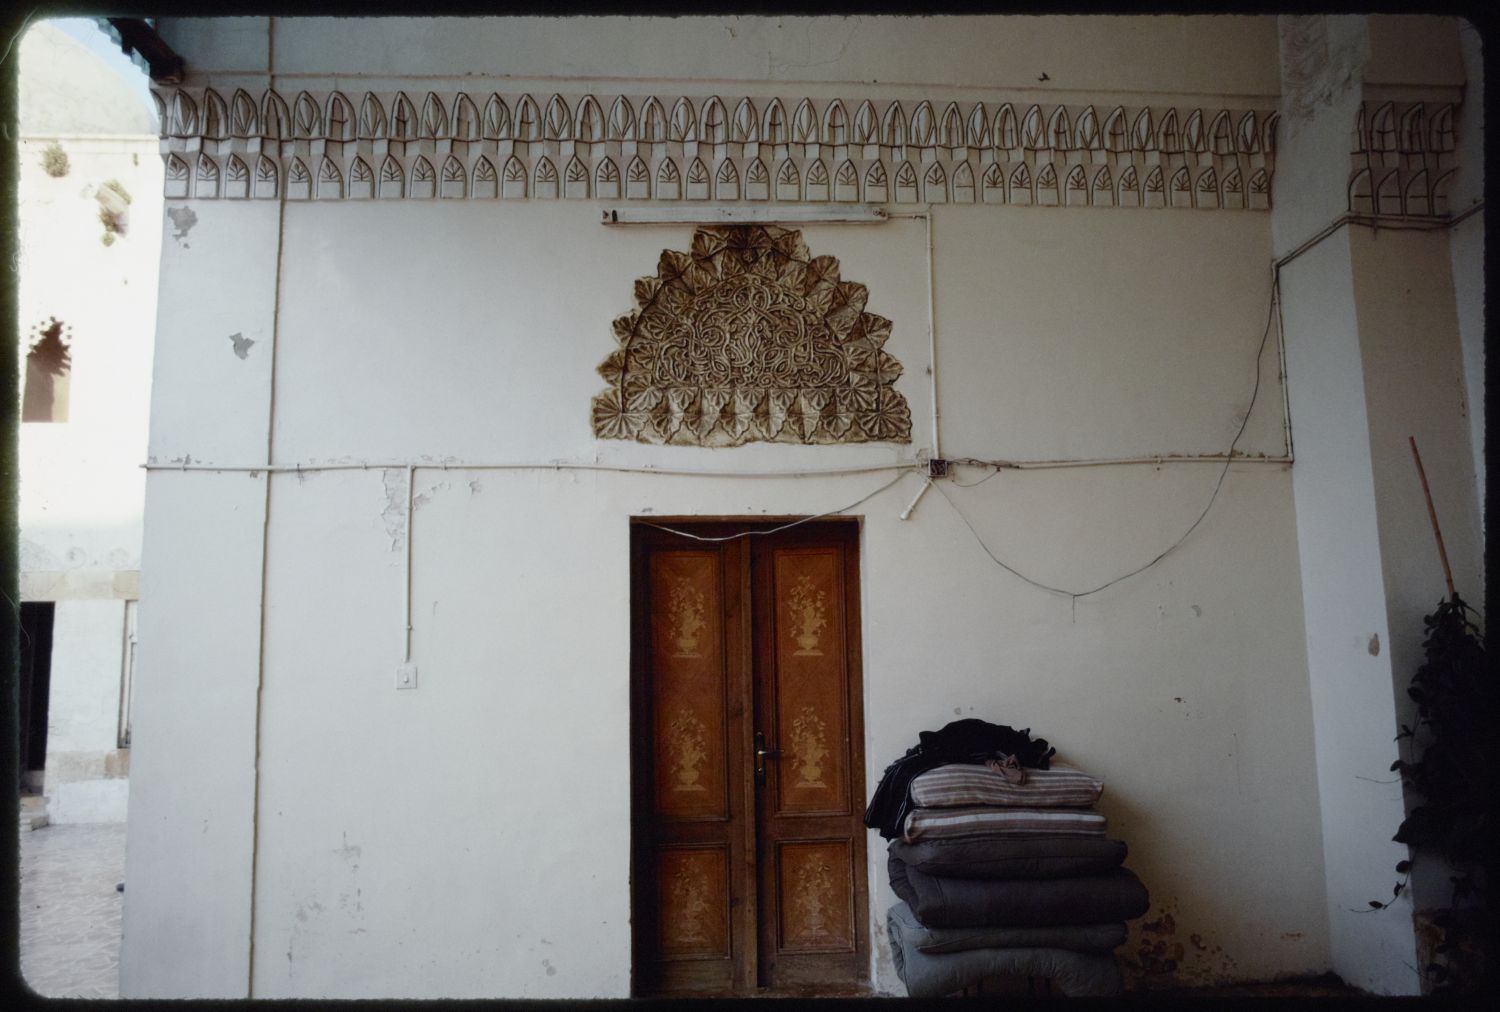 Interior of iwan, showing wall with decorative lunette and cornice.